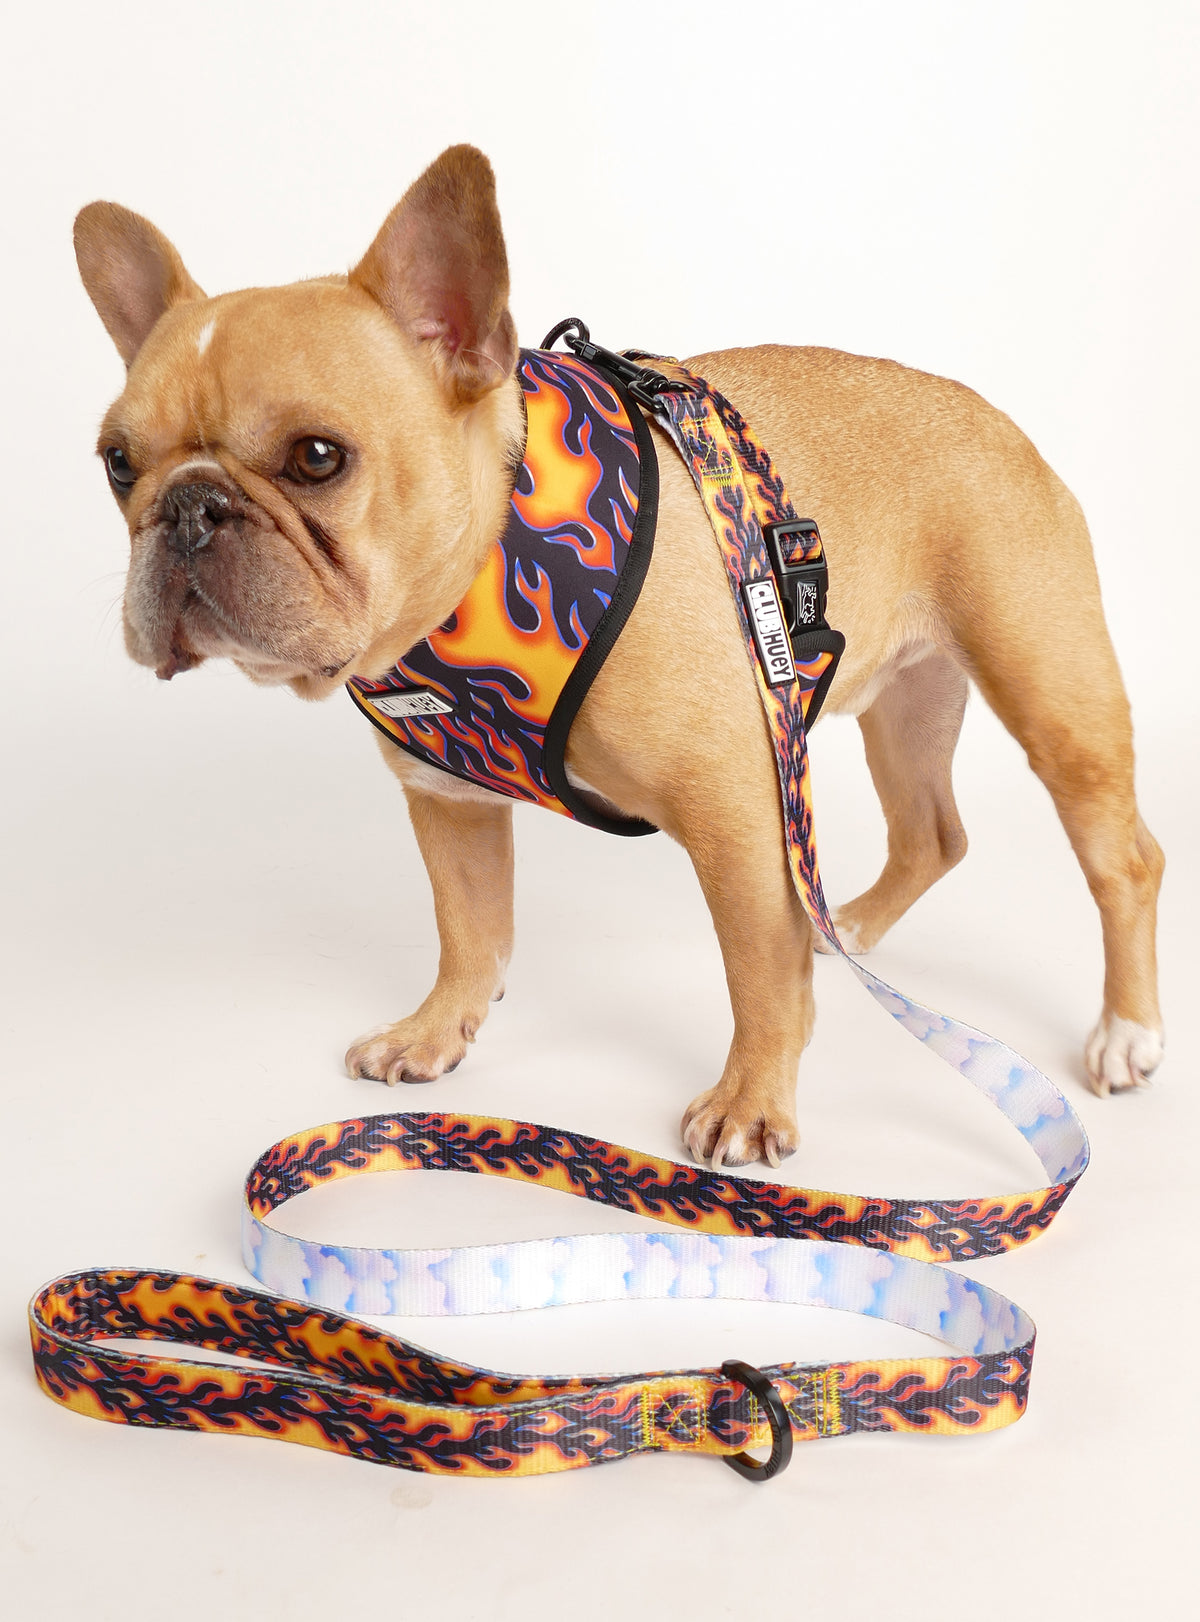 The Heaven And Heck Reversible Harness